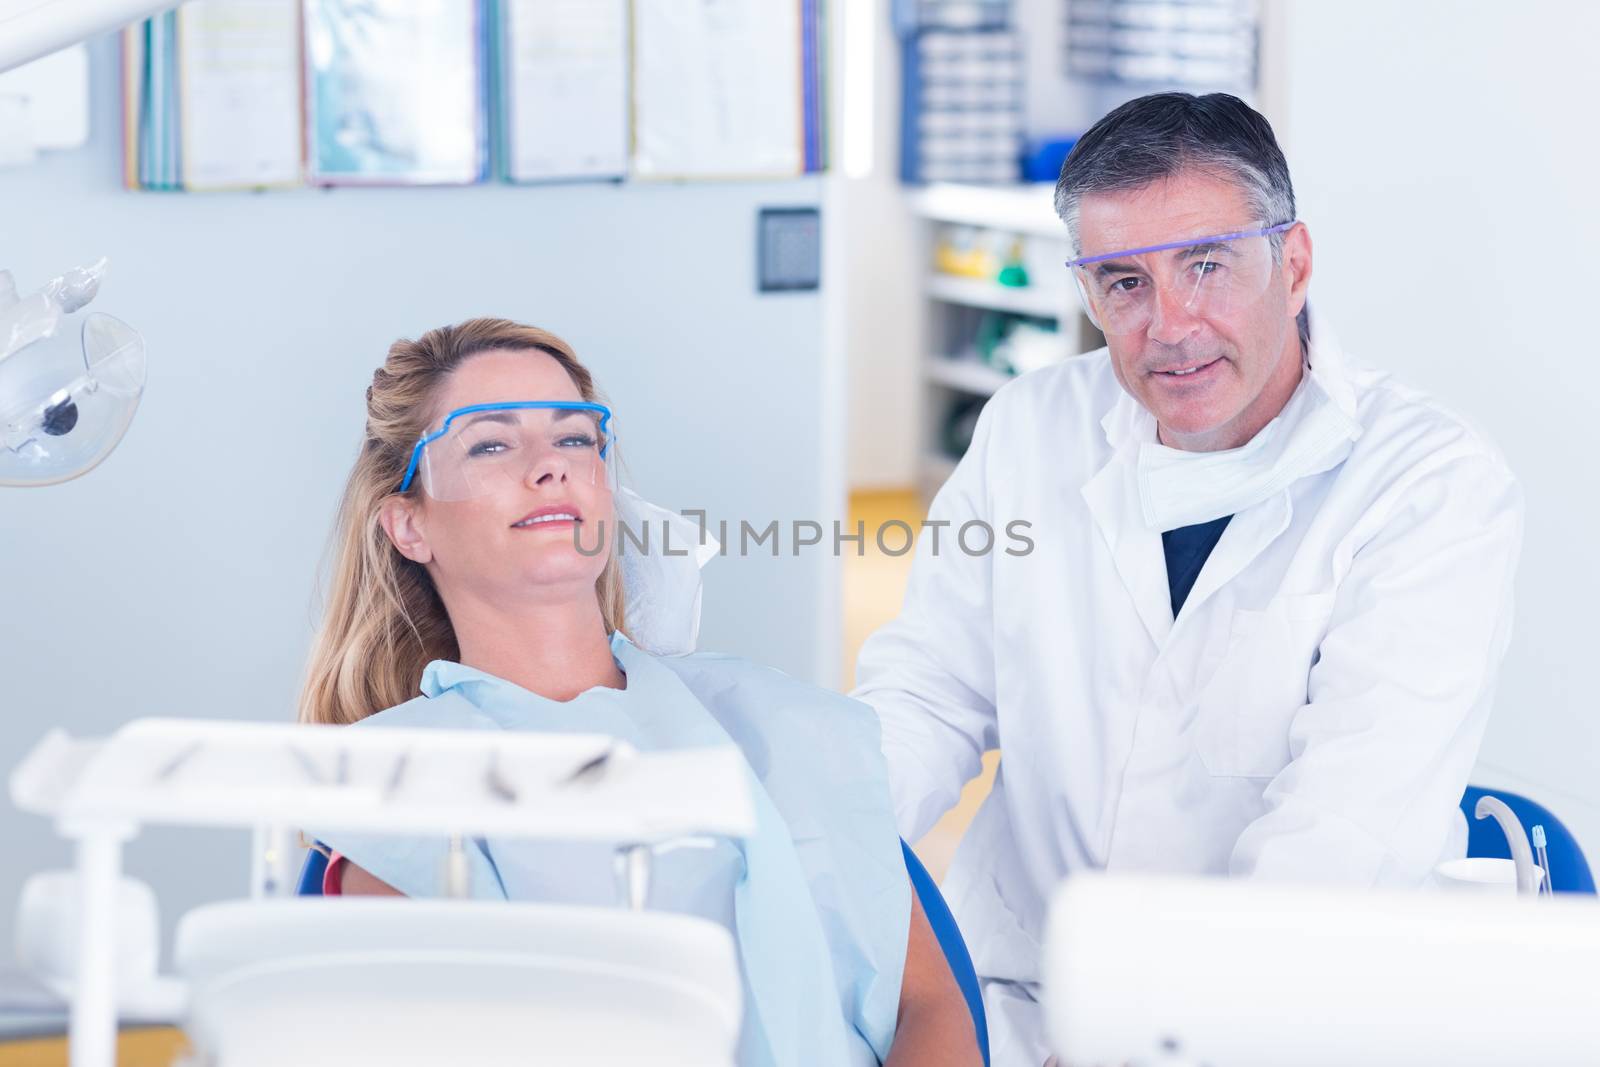 Patient and dentist smiling at camera by Wavebreakmedia